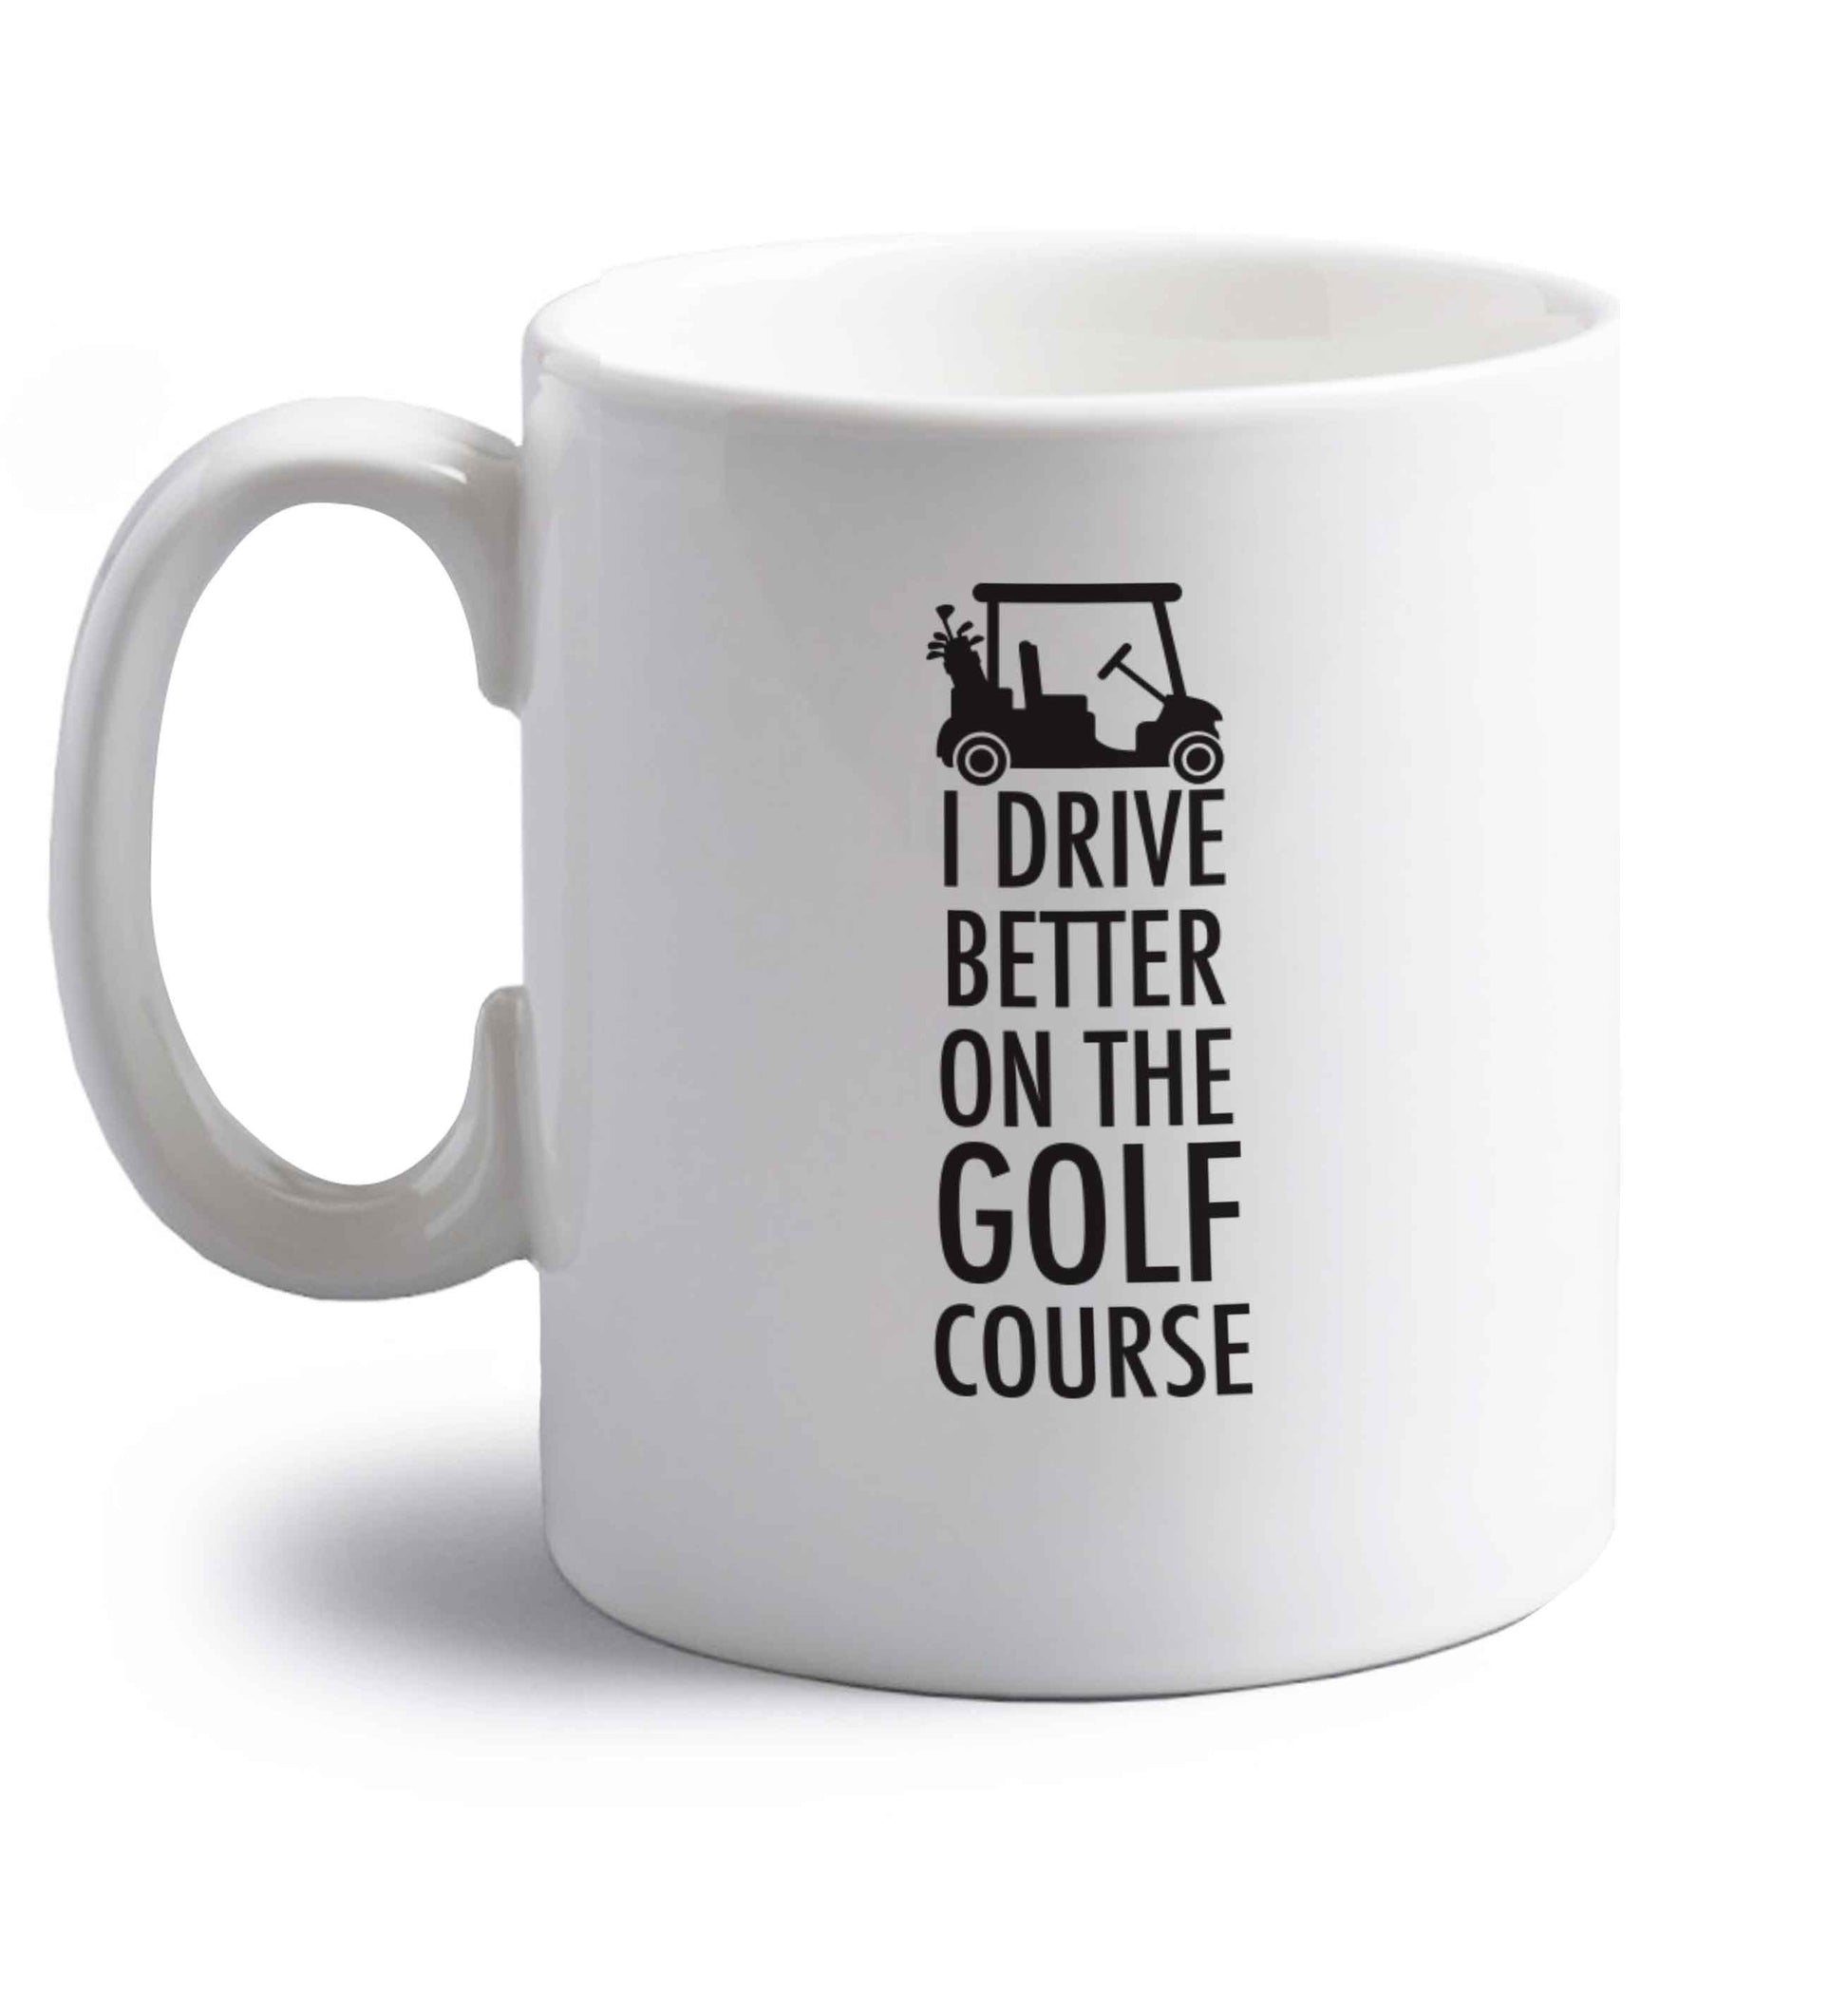 I drive better on the golf course right handed white ceramic mug 